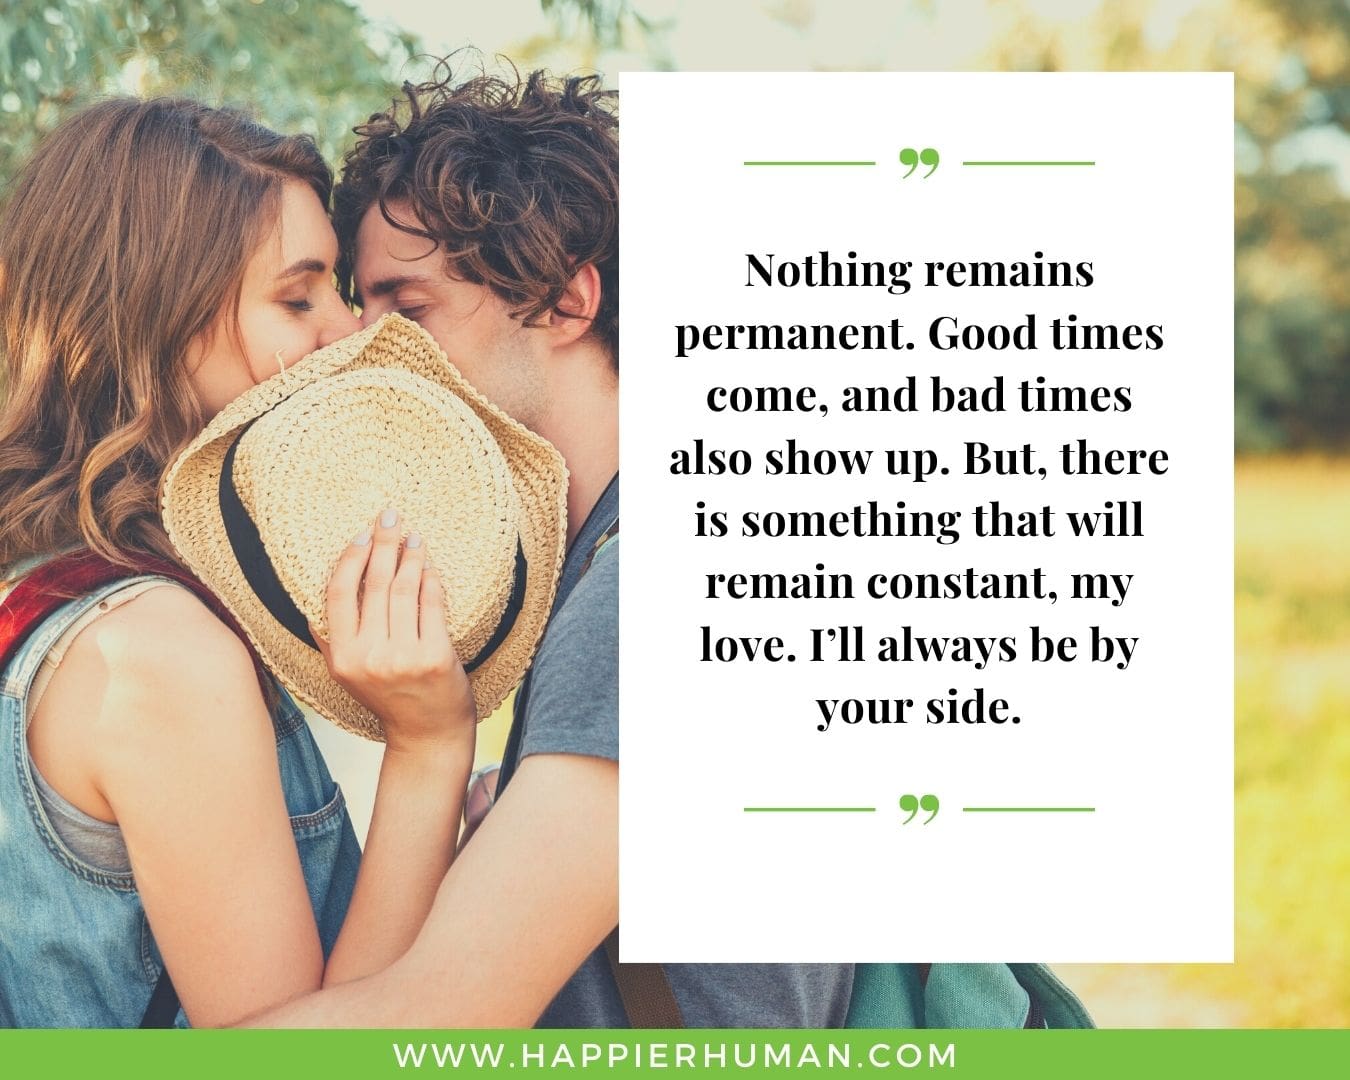 I’m Here for You Quotes - “Nothing remains permanent. Good times come, and bad times also show up. But, there is something that will remain constant, my love. I’ll always be by your side.”